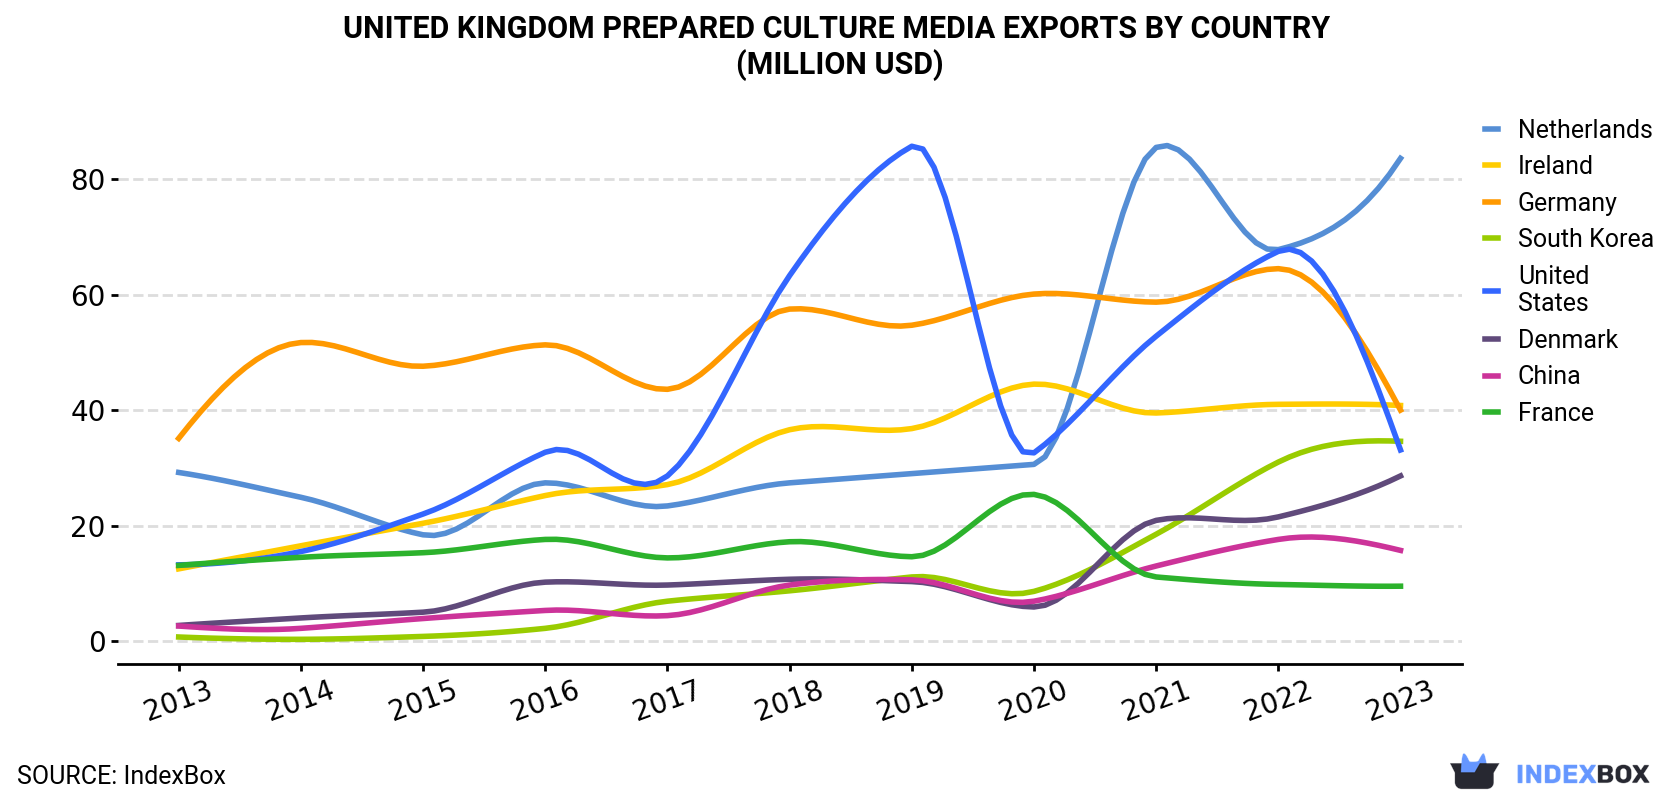 United Kingdom Prepared Culture Media Exports By Country (Million USD)